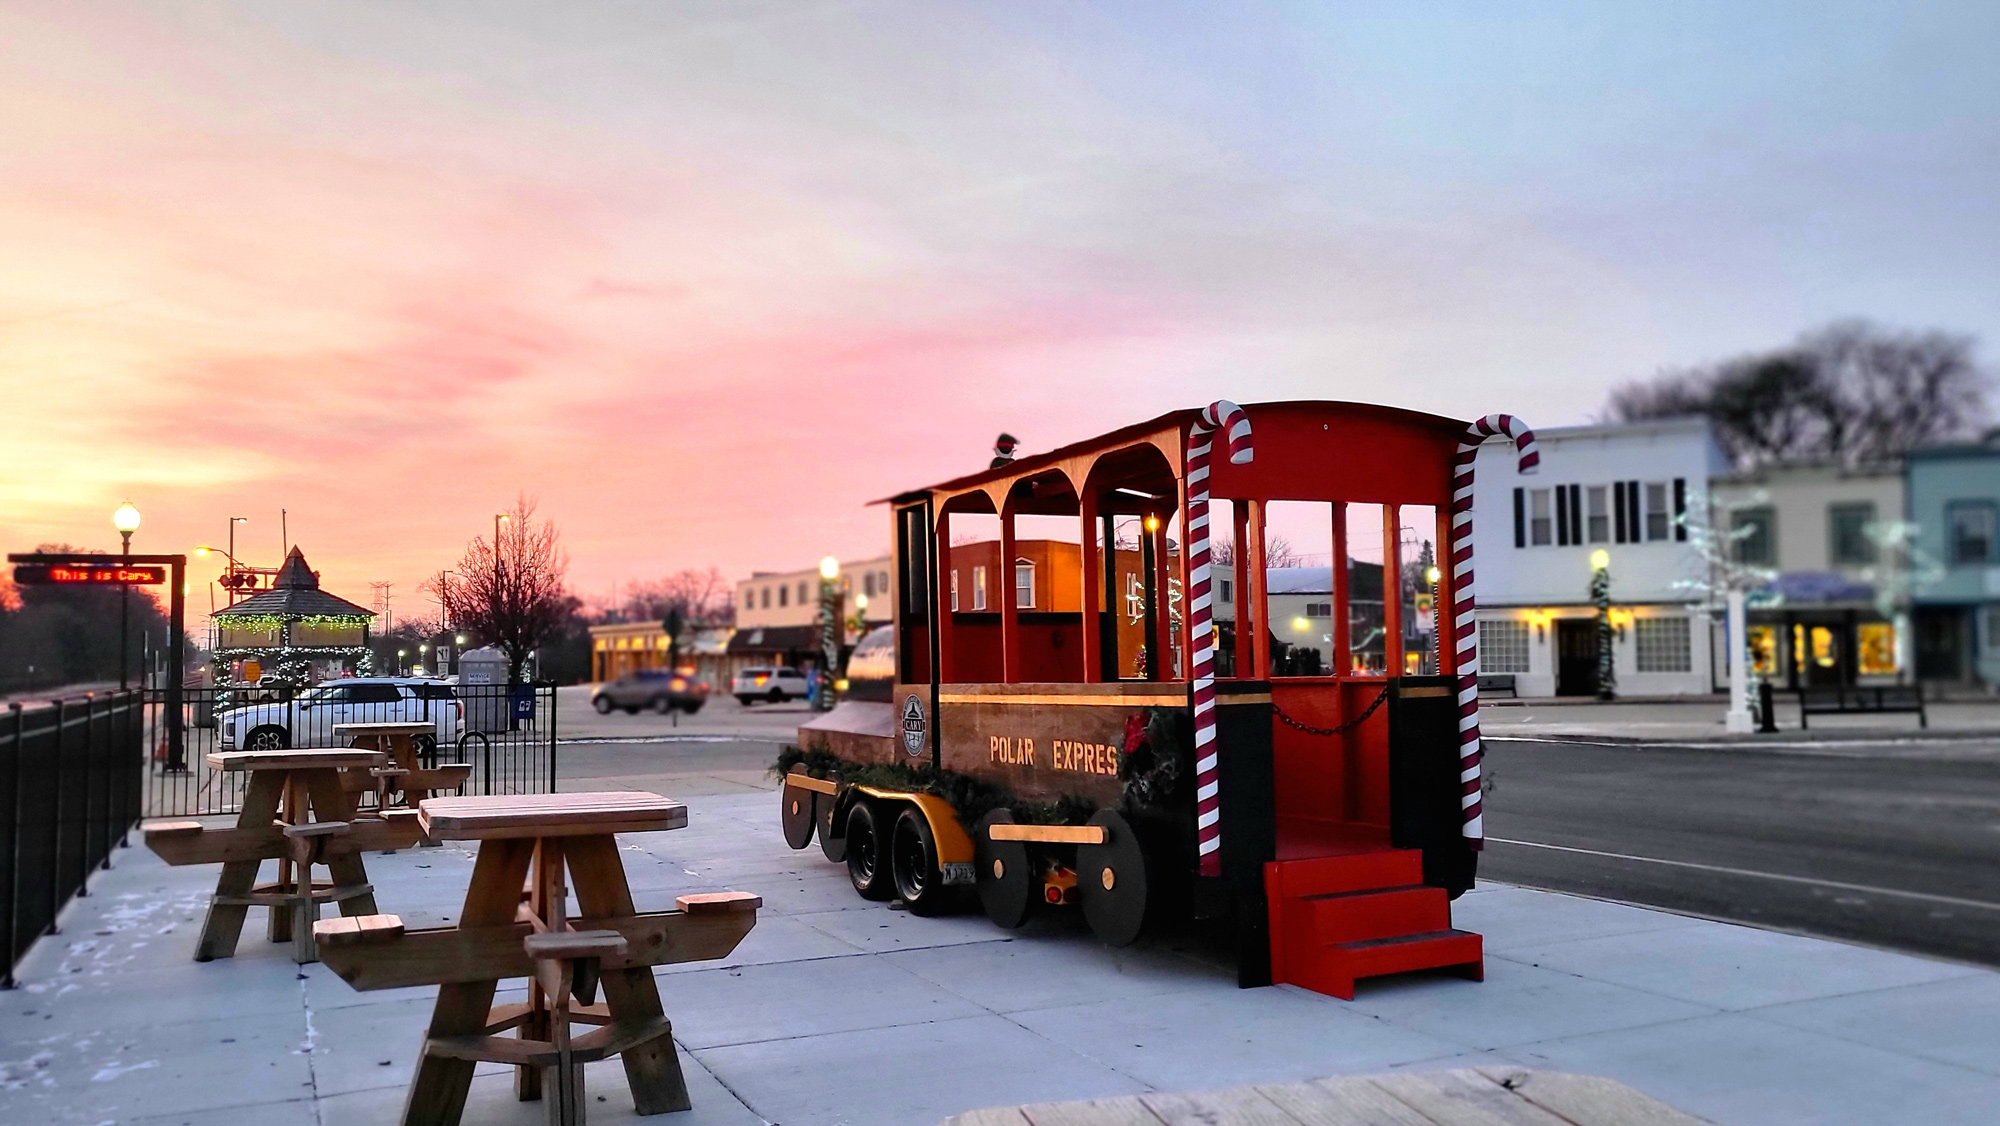 outdoor seating with polar express train